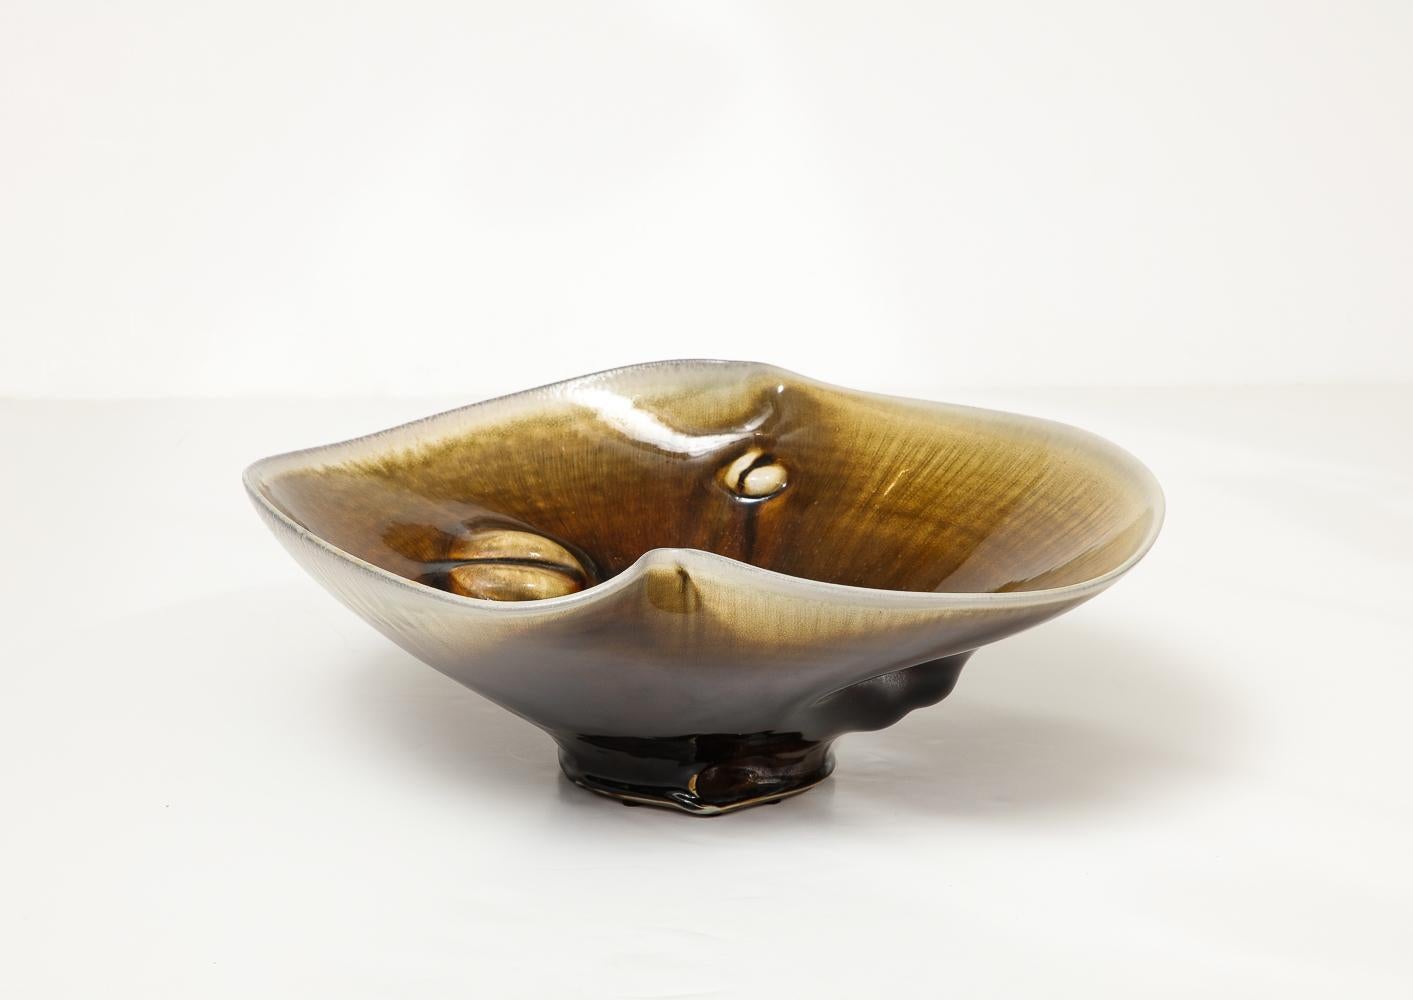 Glazed Porcelain Bowl No. 202003 by Chris Gustin In New Condition For Sale In New York, NY